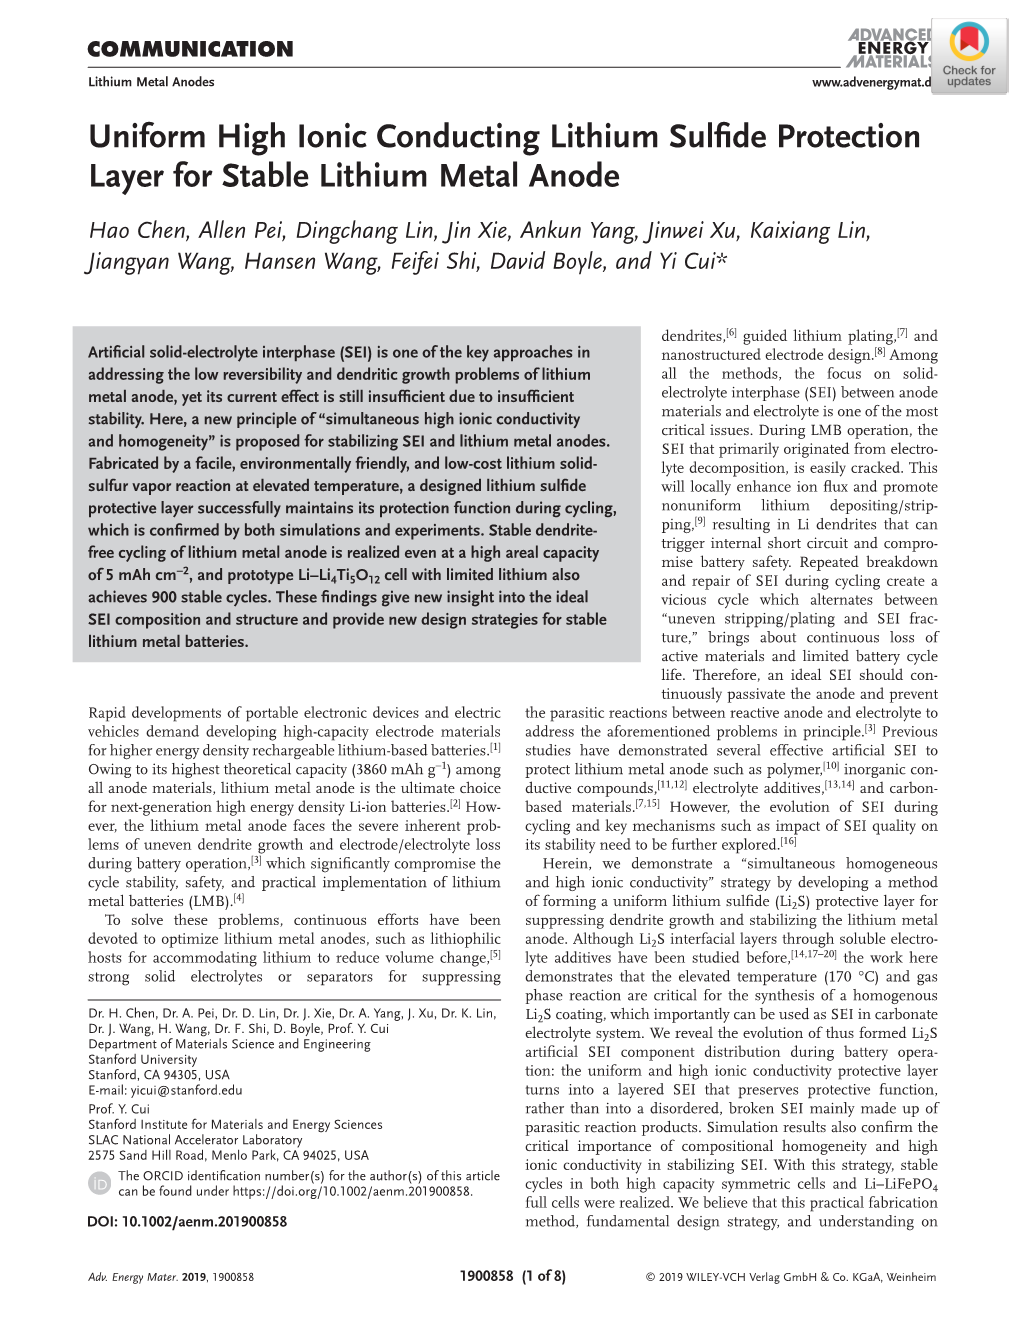 Uniform High Ionic Conducting Lithium Sulfide Protection Layer for Stable Lithium Metal Anode